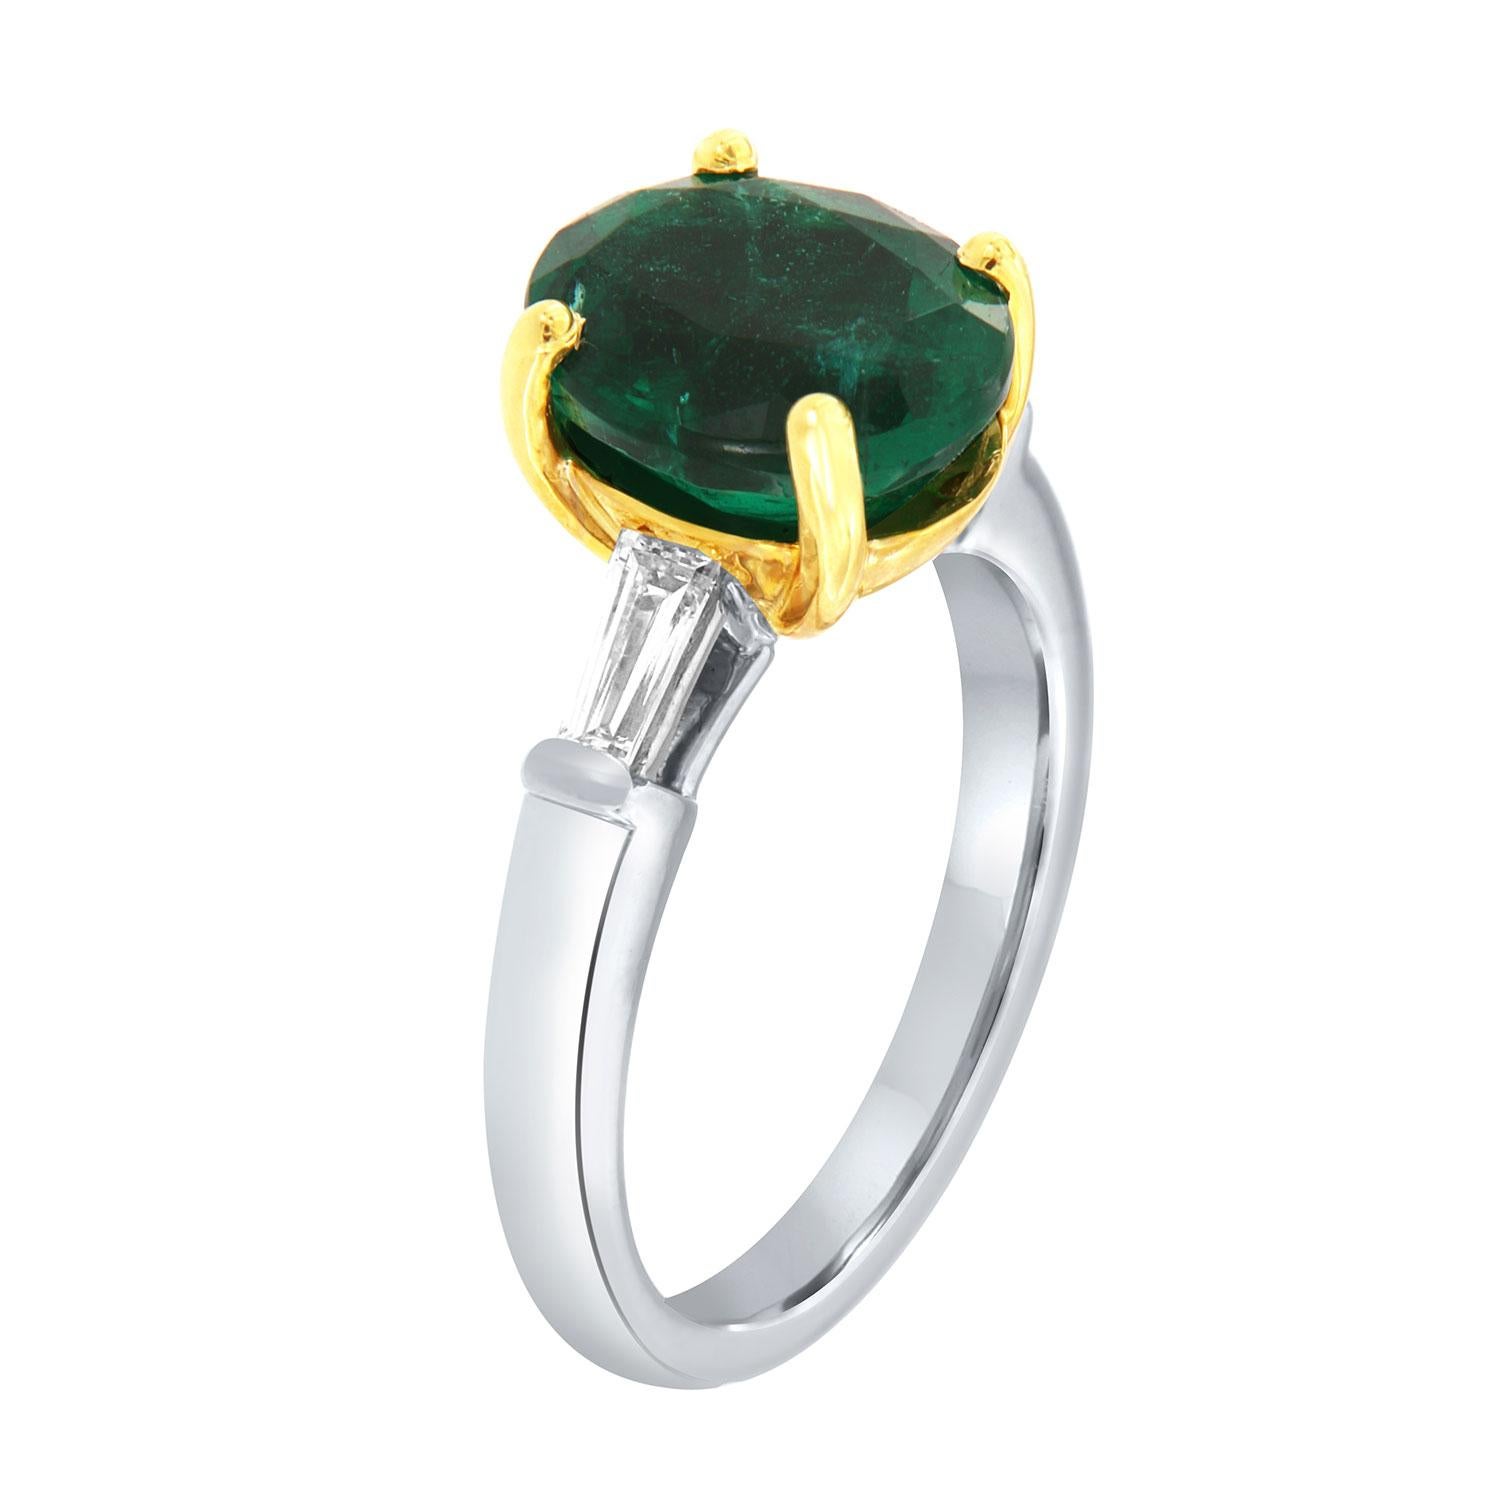 This classic Platinum and 18k Yellow Gold ring features a 3.86 Carat Oval-shaped Vibrant green Natural Emerald flanked by two(2) Baguette-shaped diamonds in a total weight of 0.36 Carat on a 2.8 mm wide band. 
This Zambian Emerald exhibits a vibrant